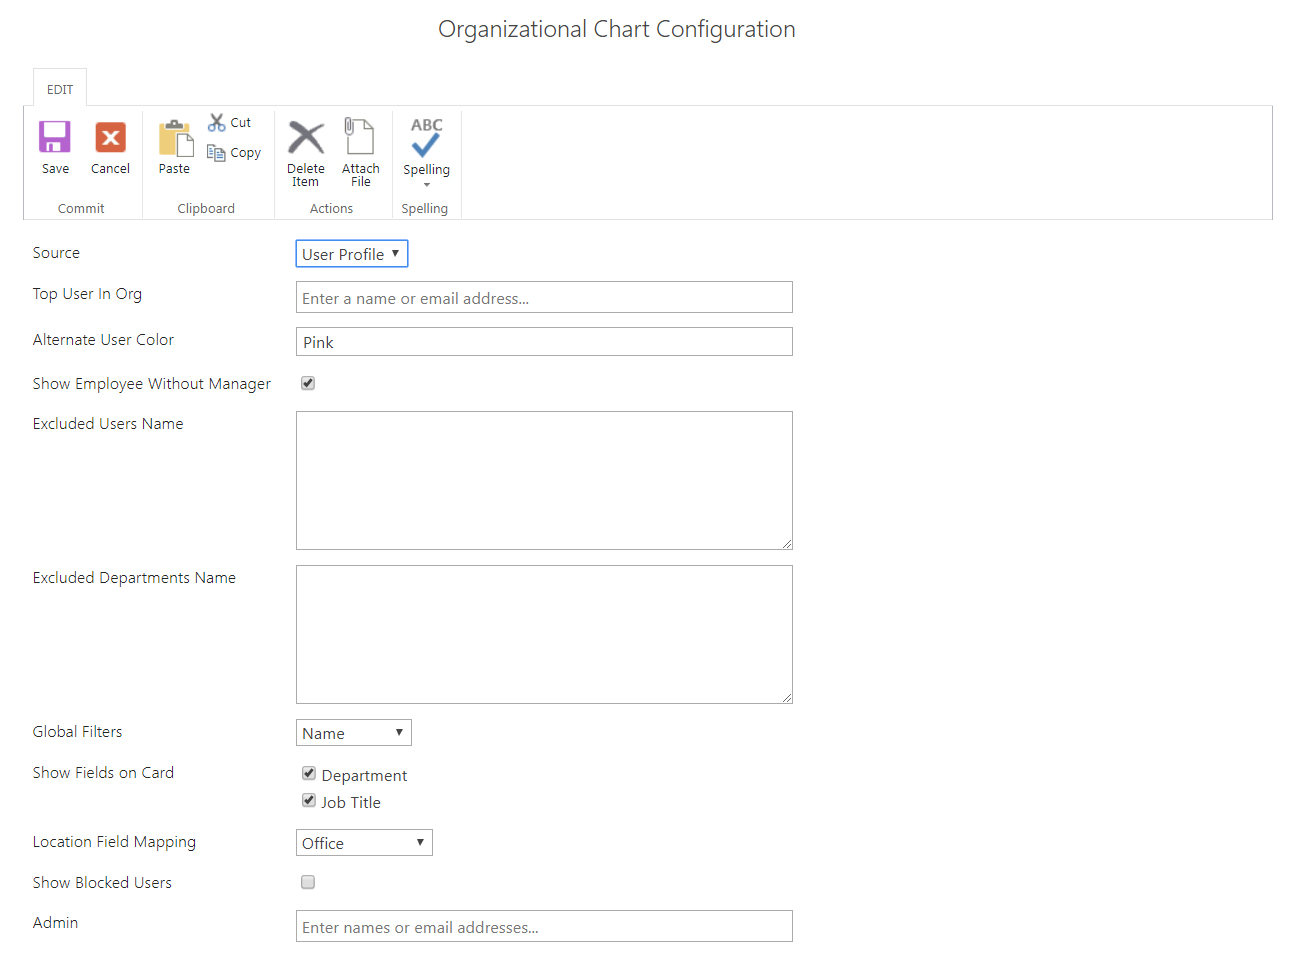 Configure and Manage Hierarchy Content Yourself